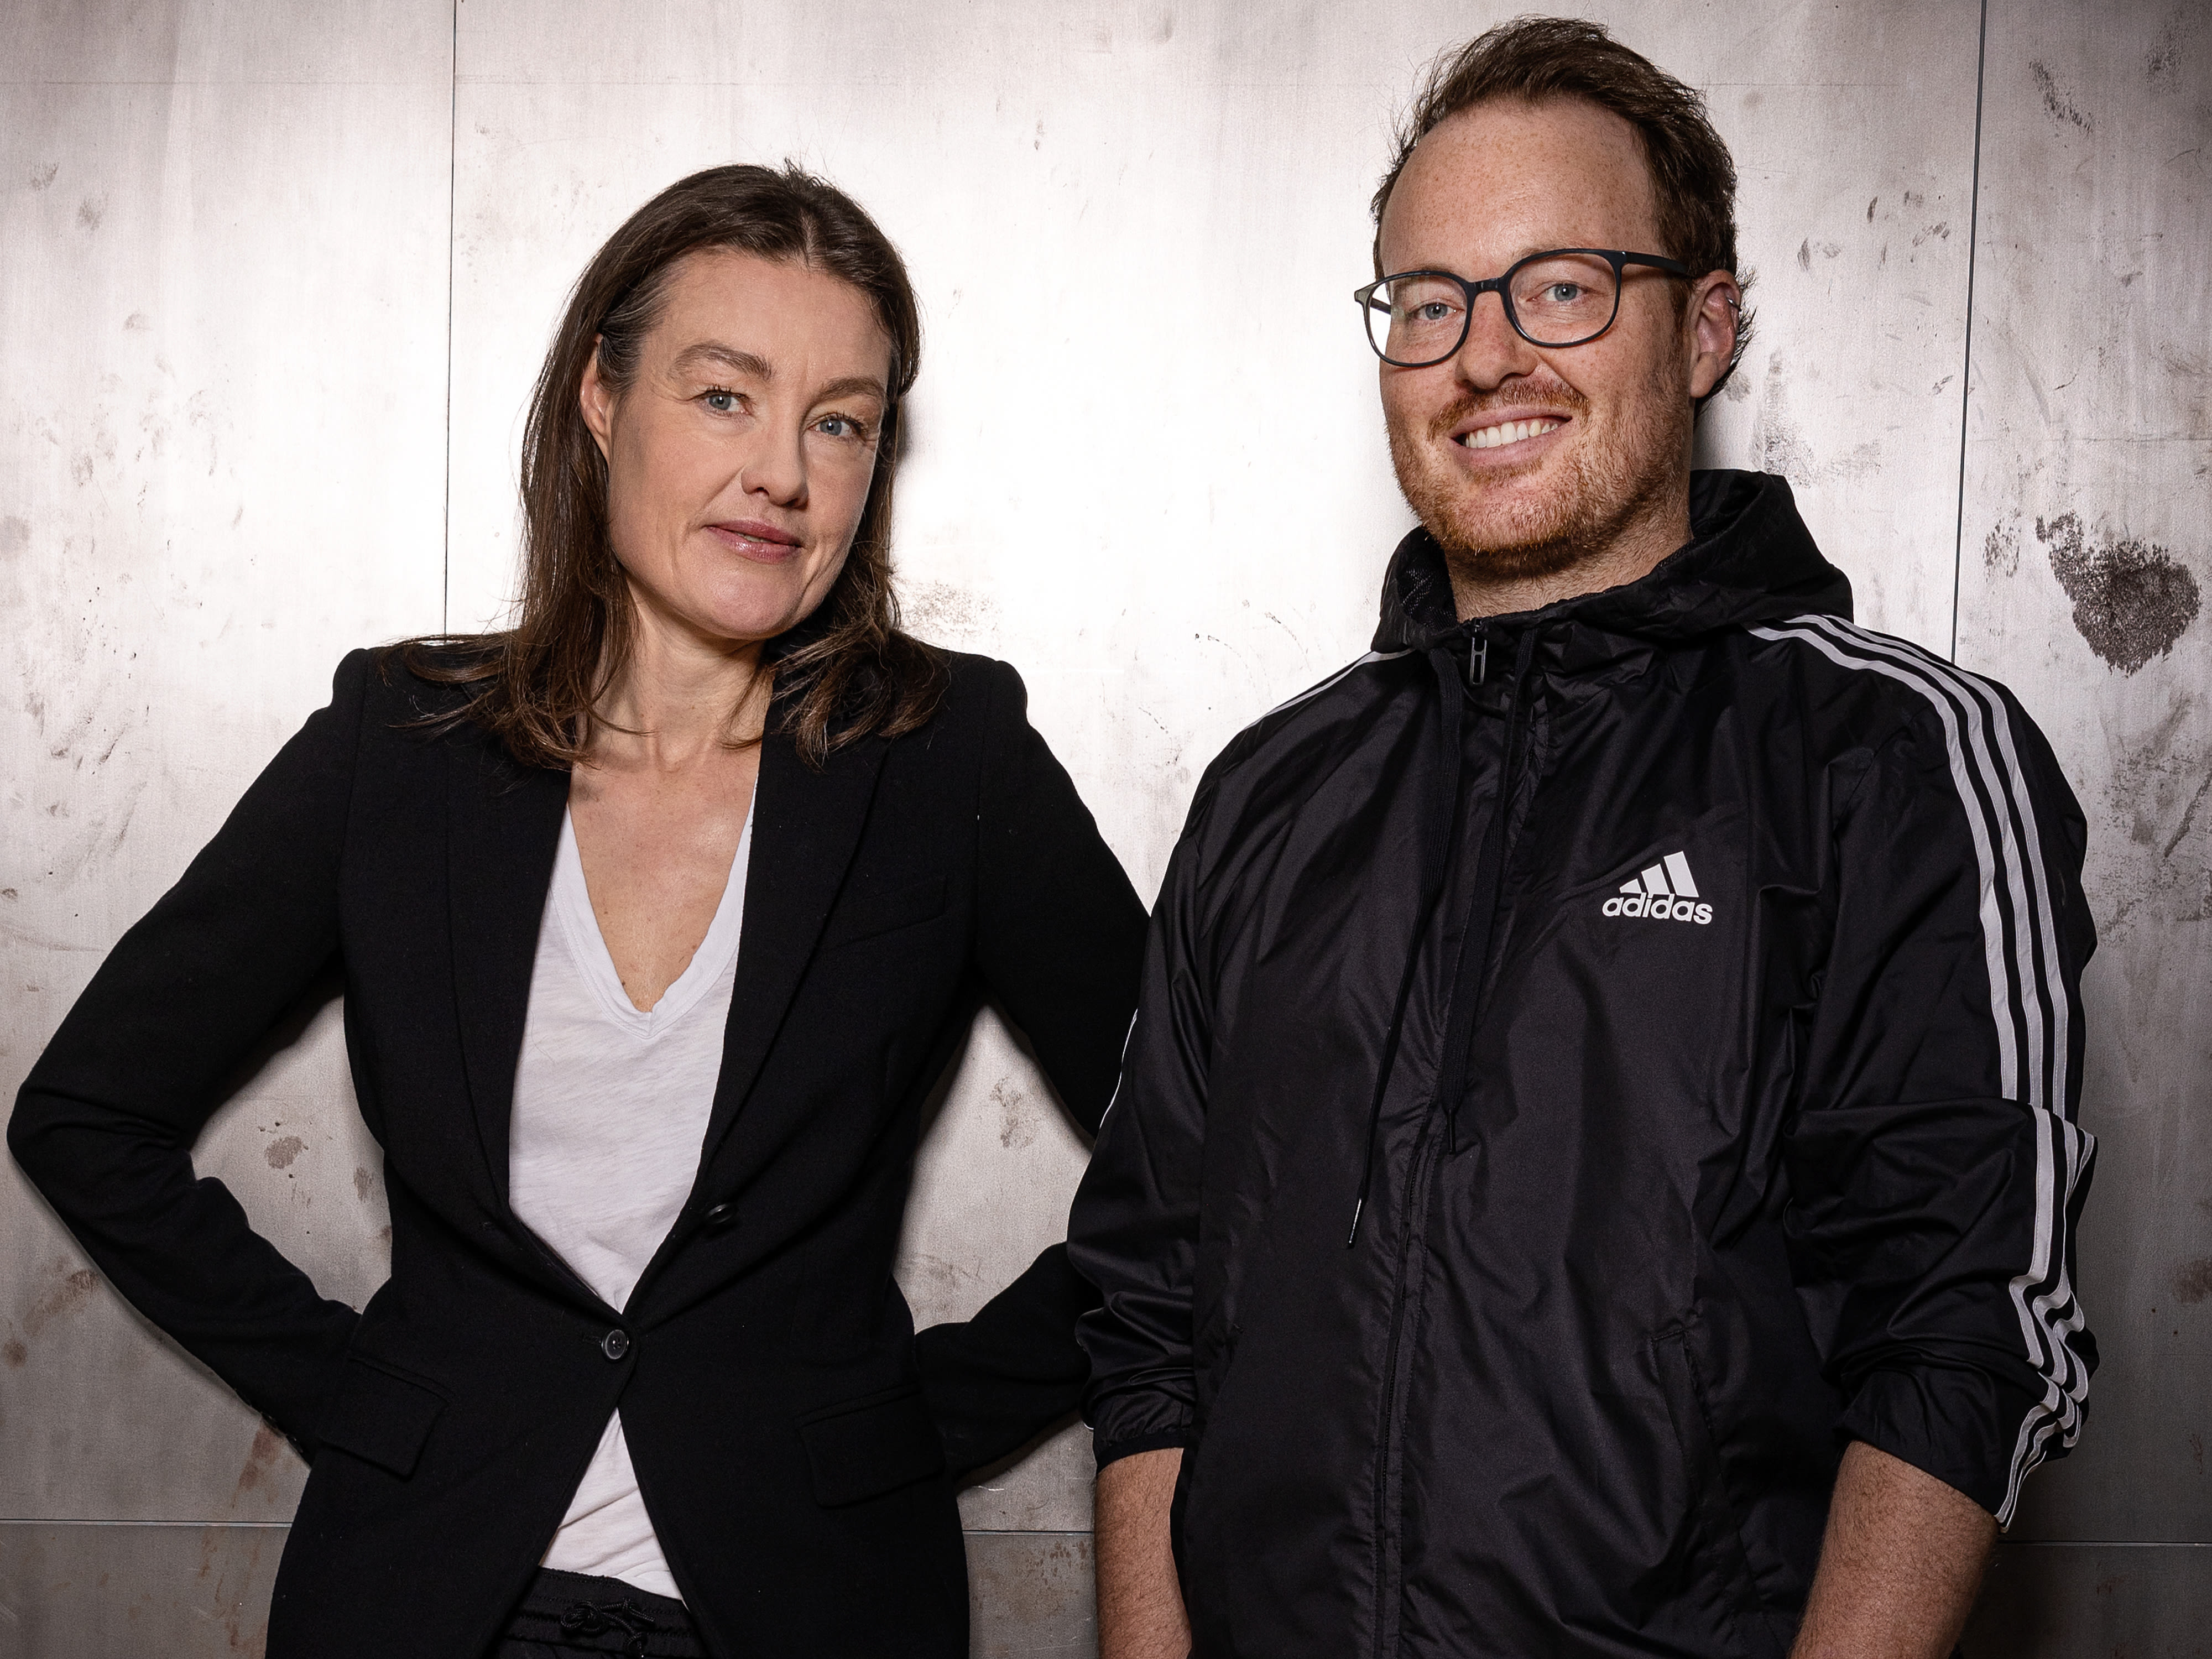 Picture of the two managing directors Katja Kraus and Robert Zitzmann in sporty outfit.